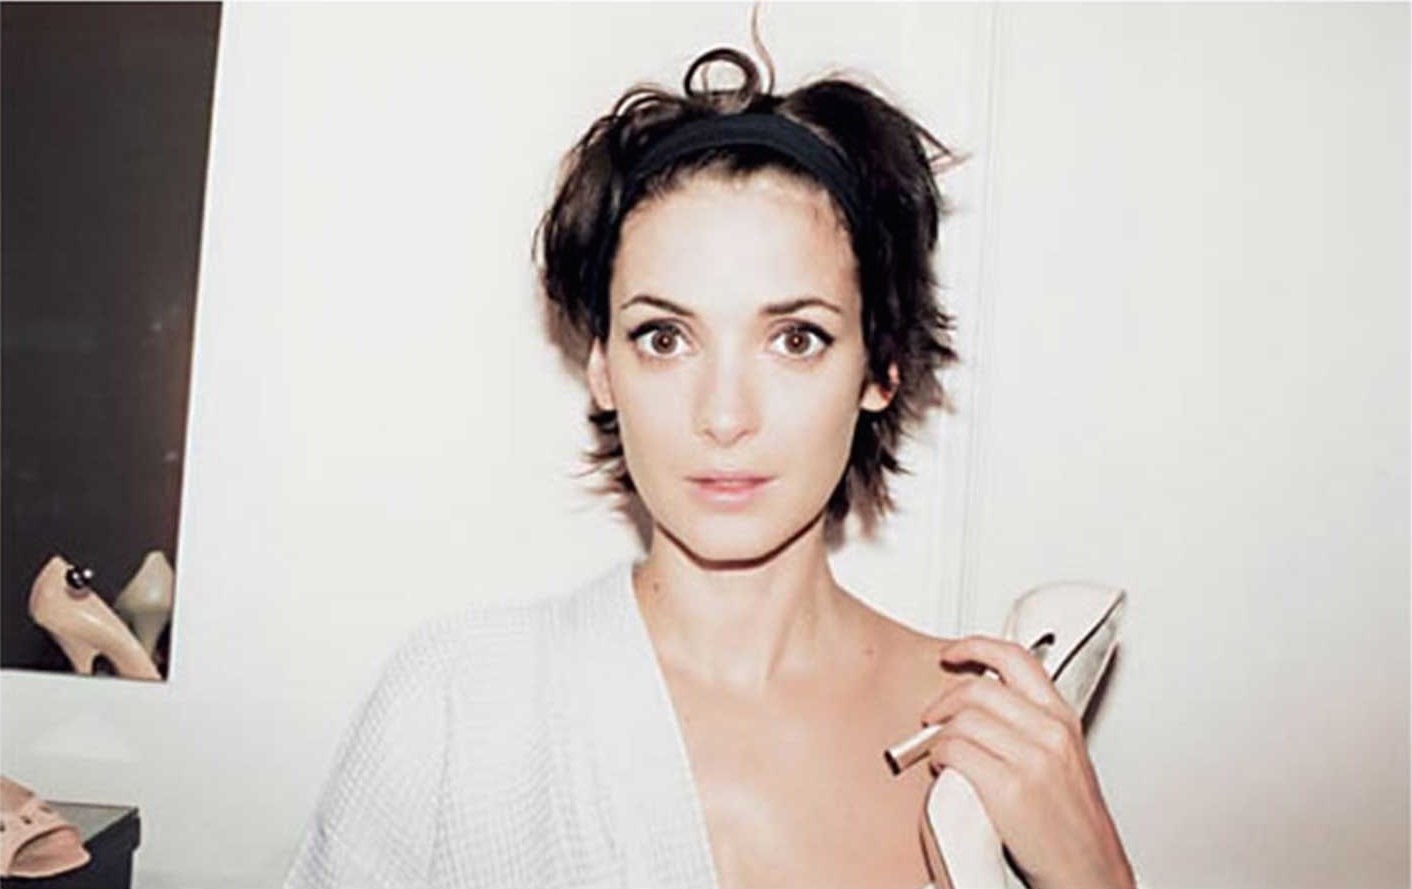 Winona Ryder stars in new Marc Jacobs campaign, two decades later